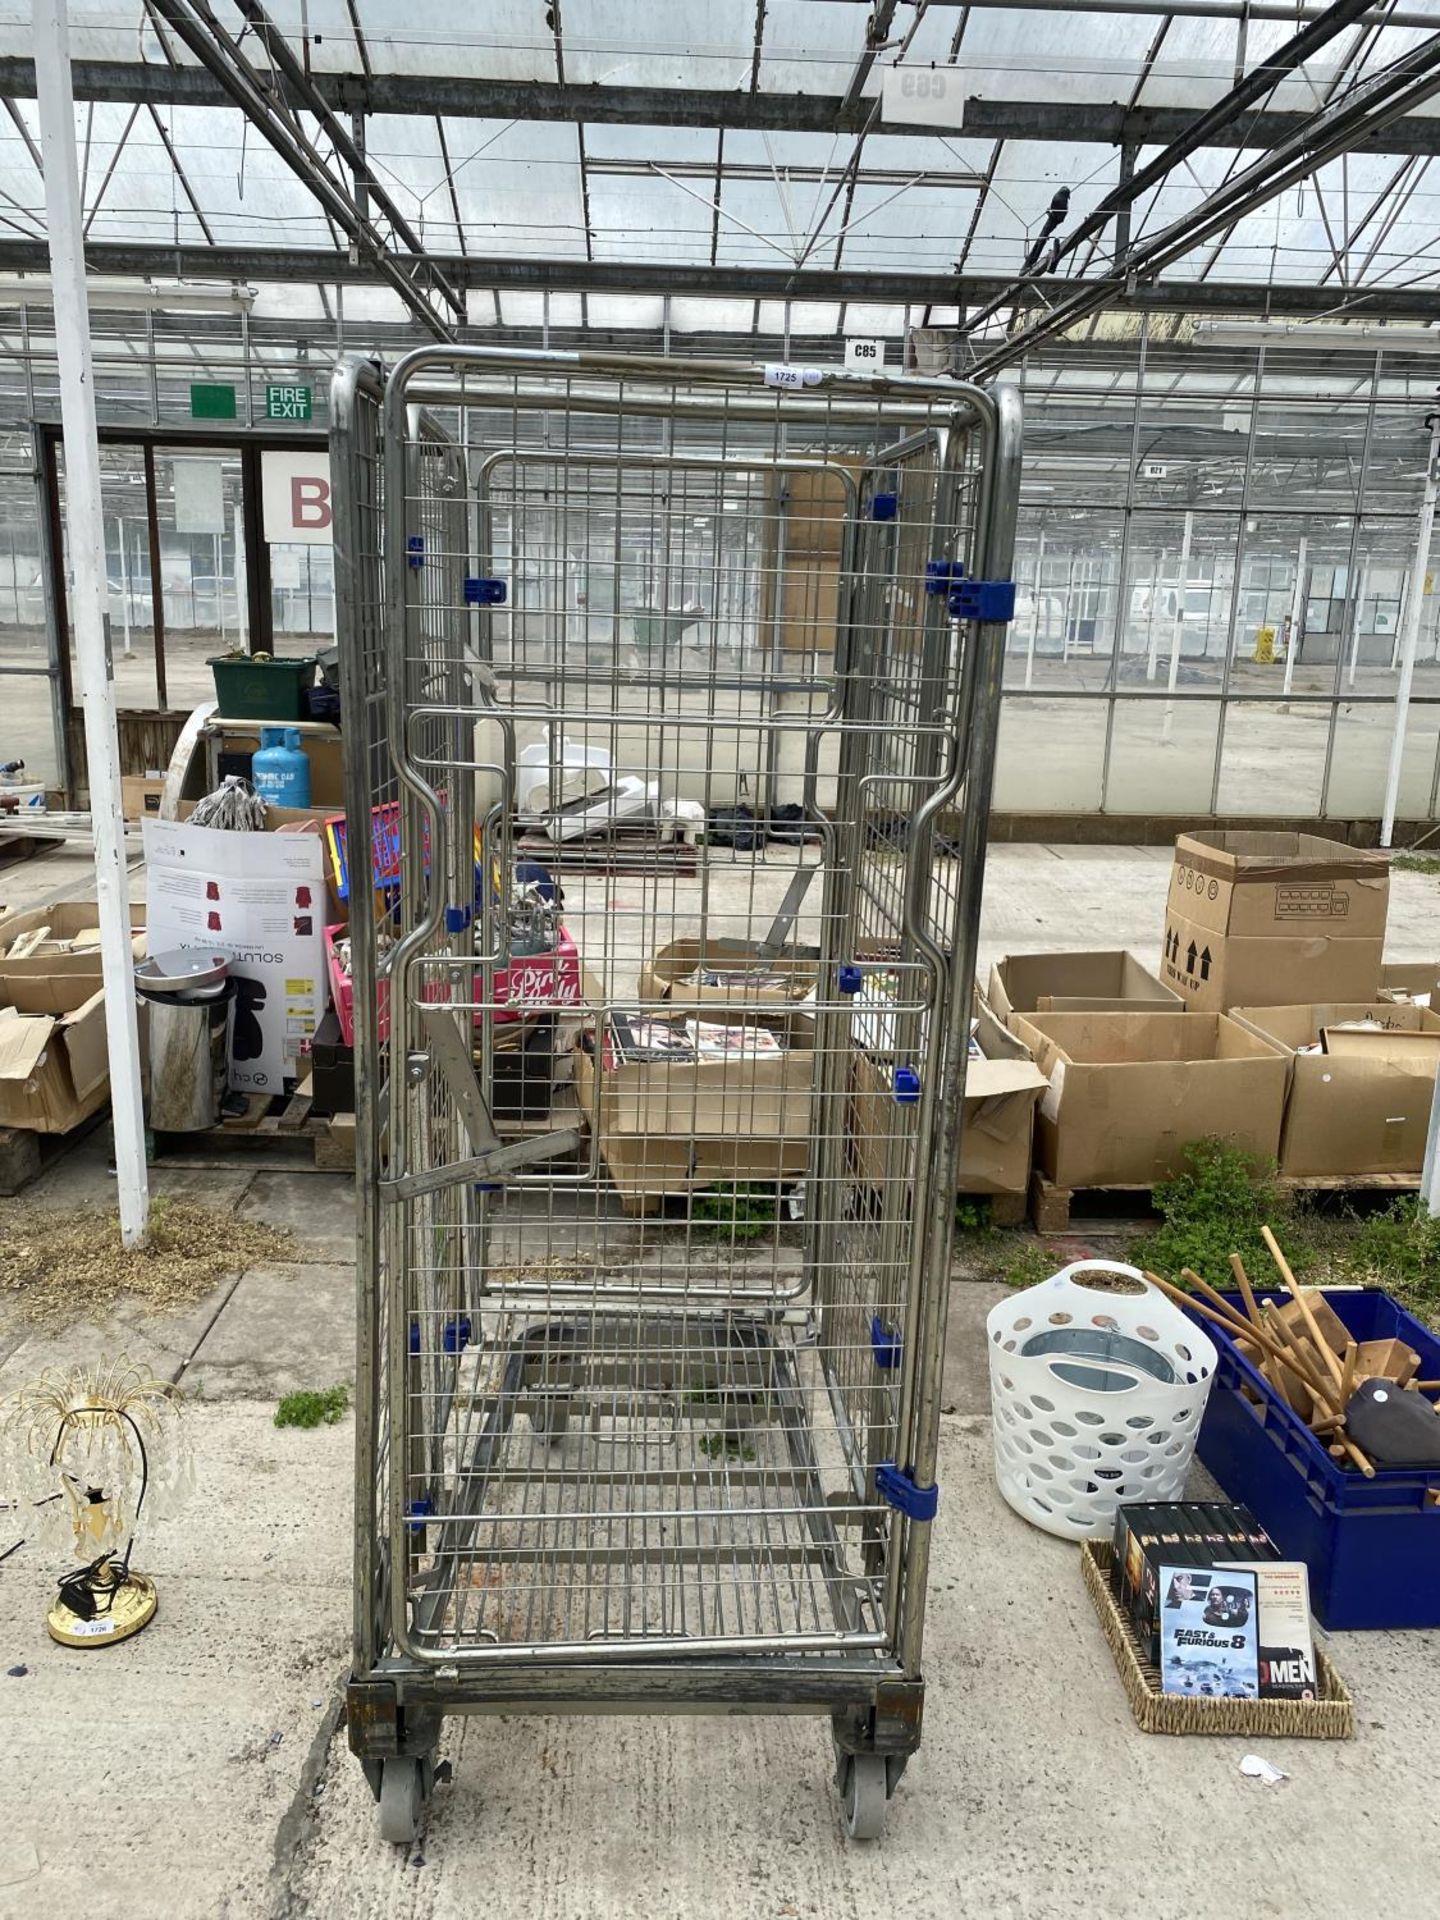 A METAL STORAGE CAGE ON TROLLEY WHEELS - Image 2 of 2